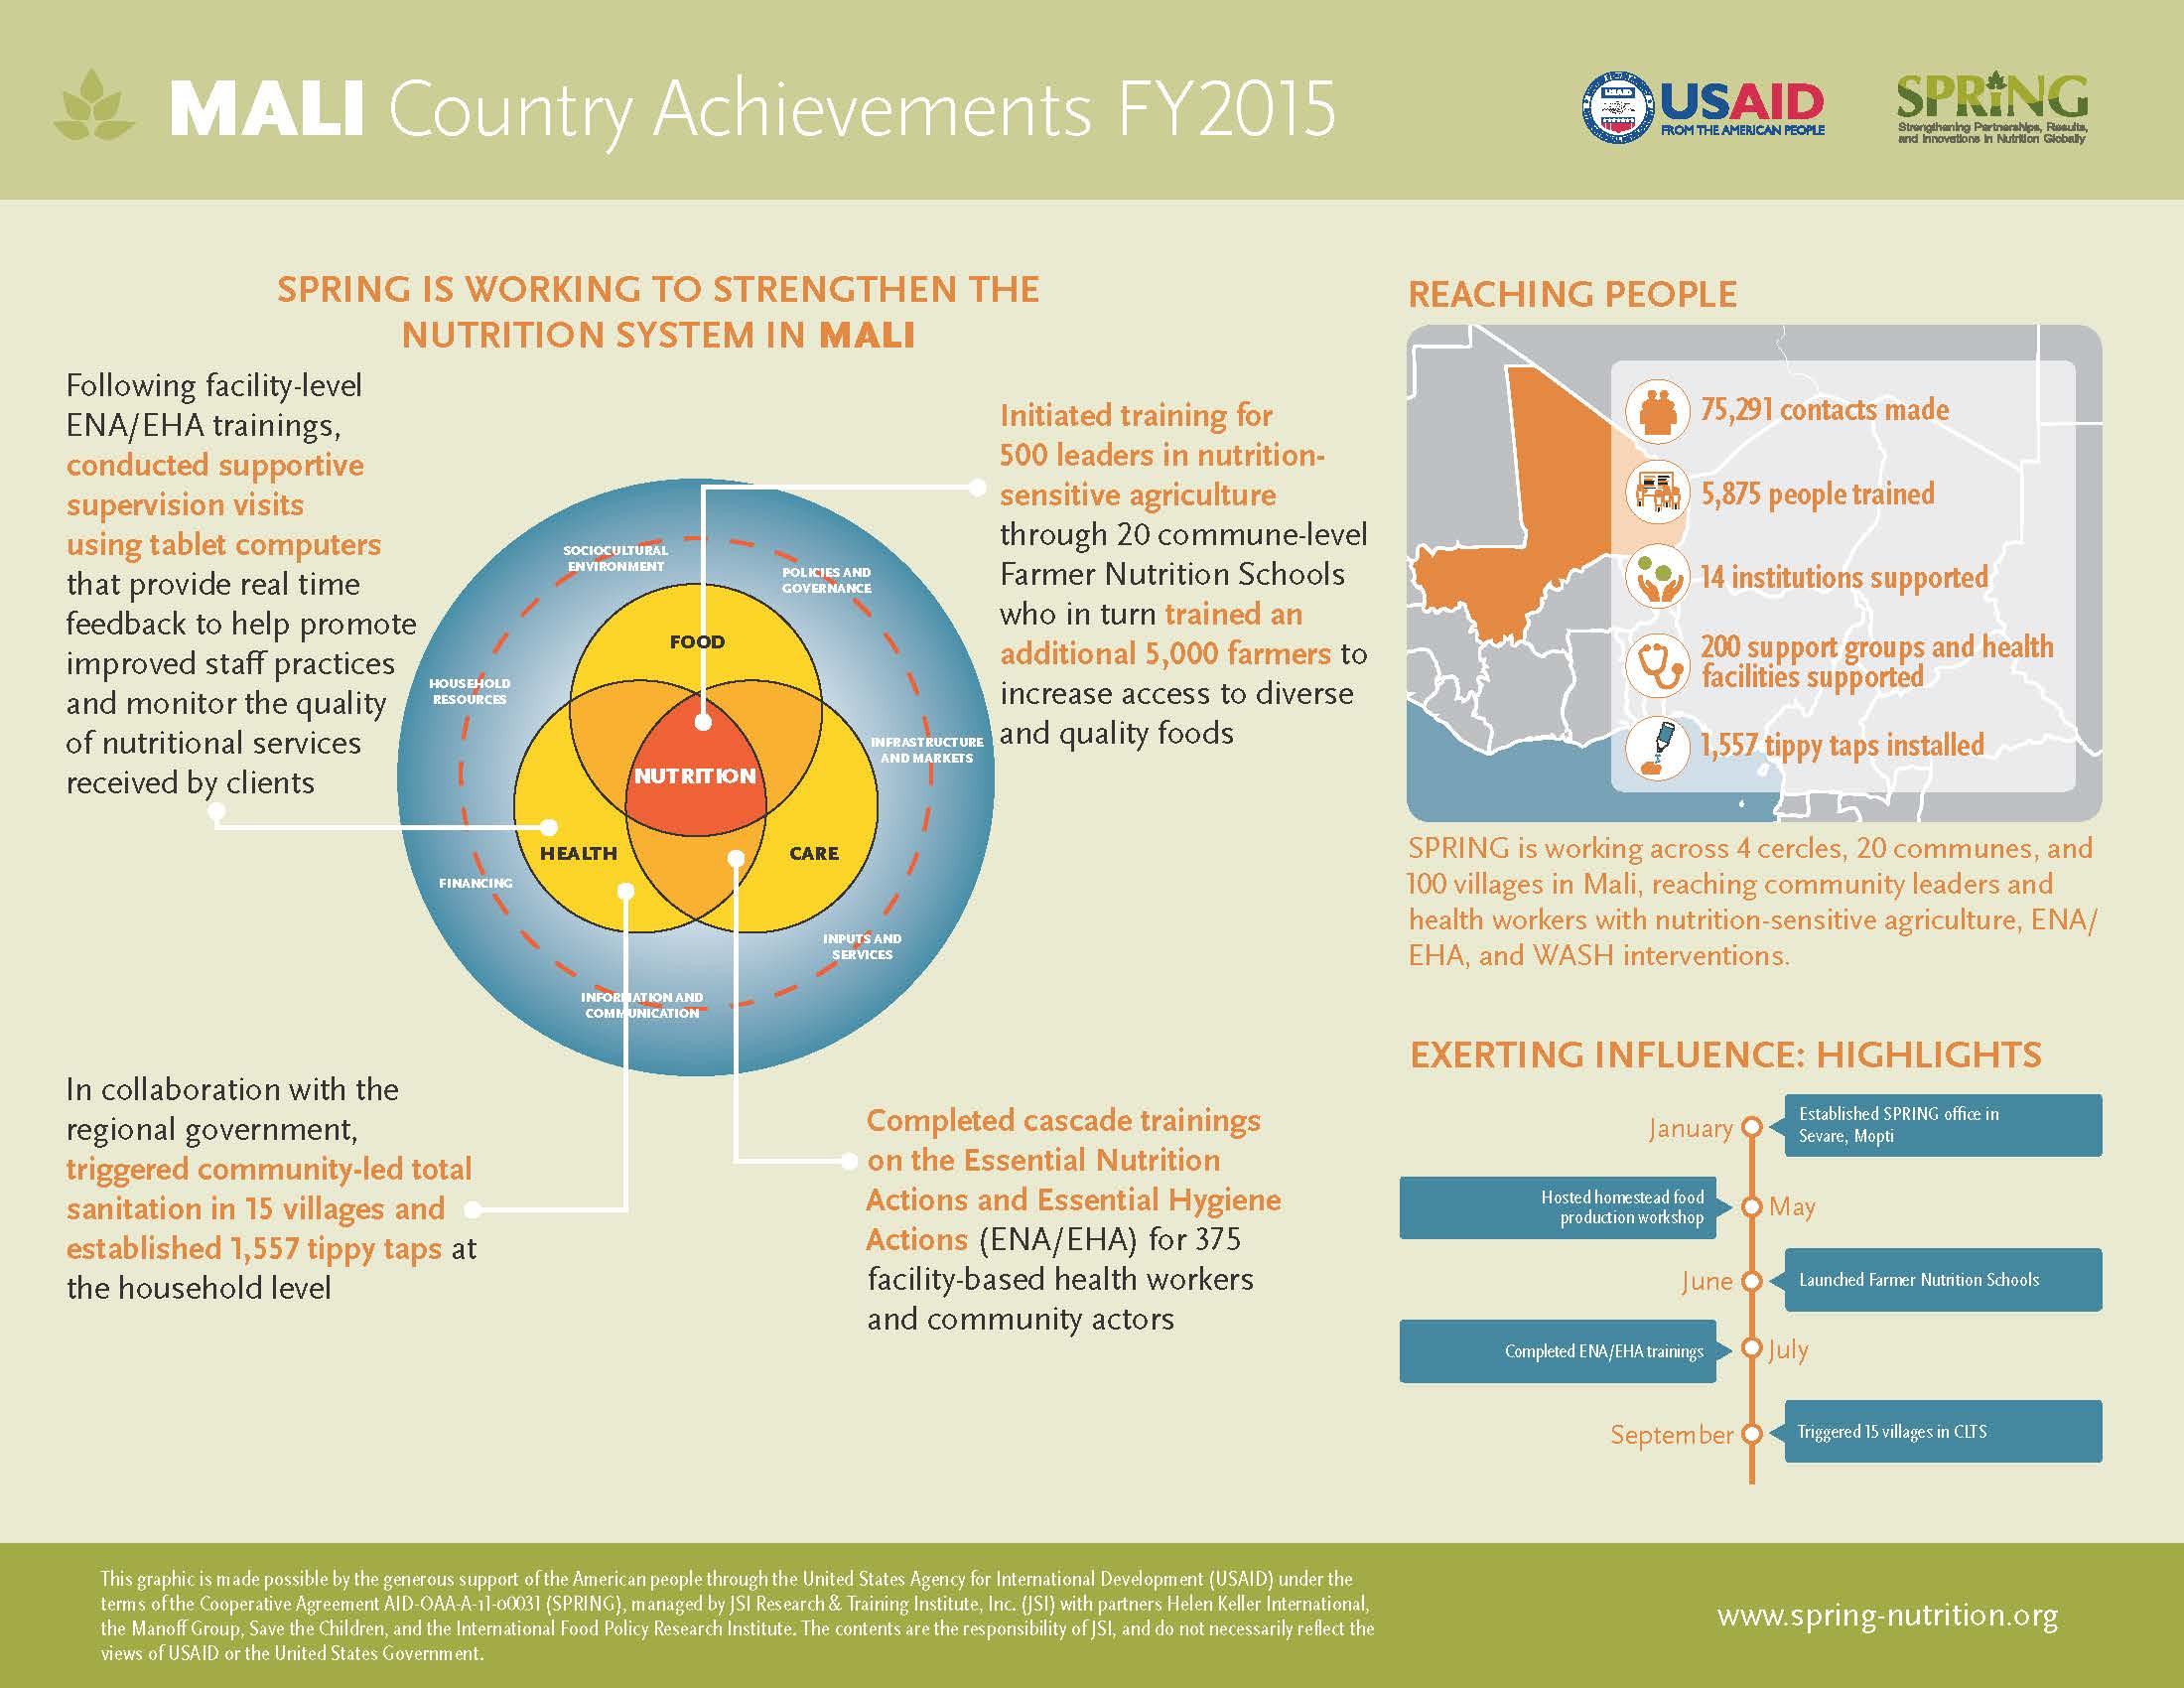 SPRING 2015 Overview - Mali